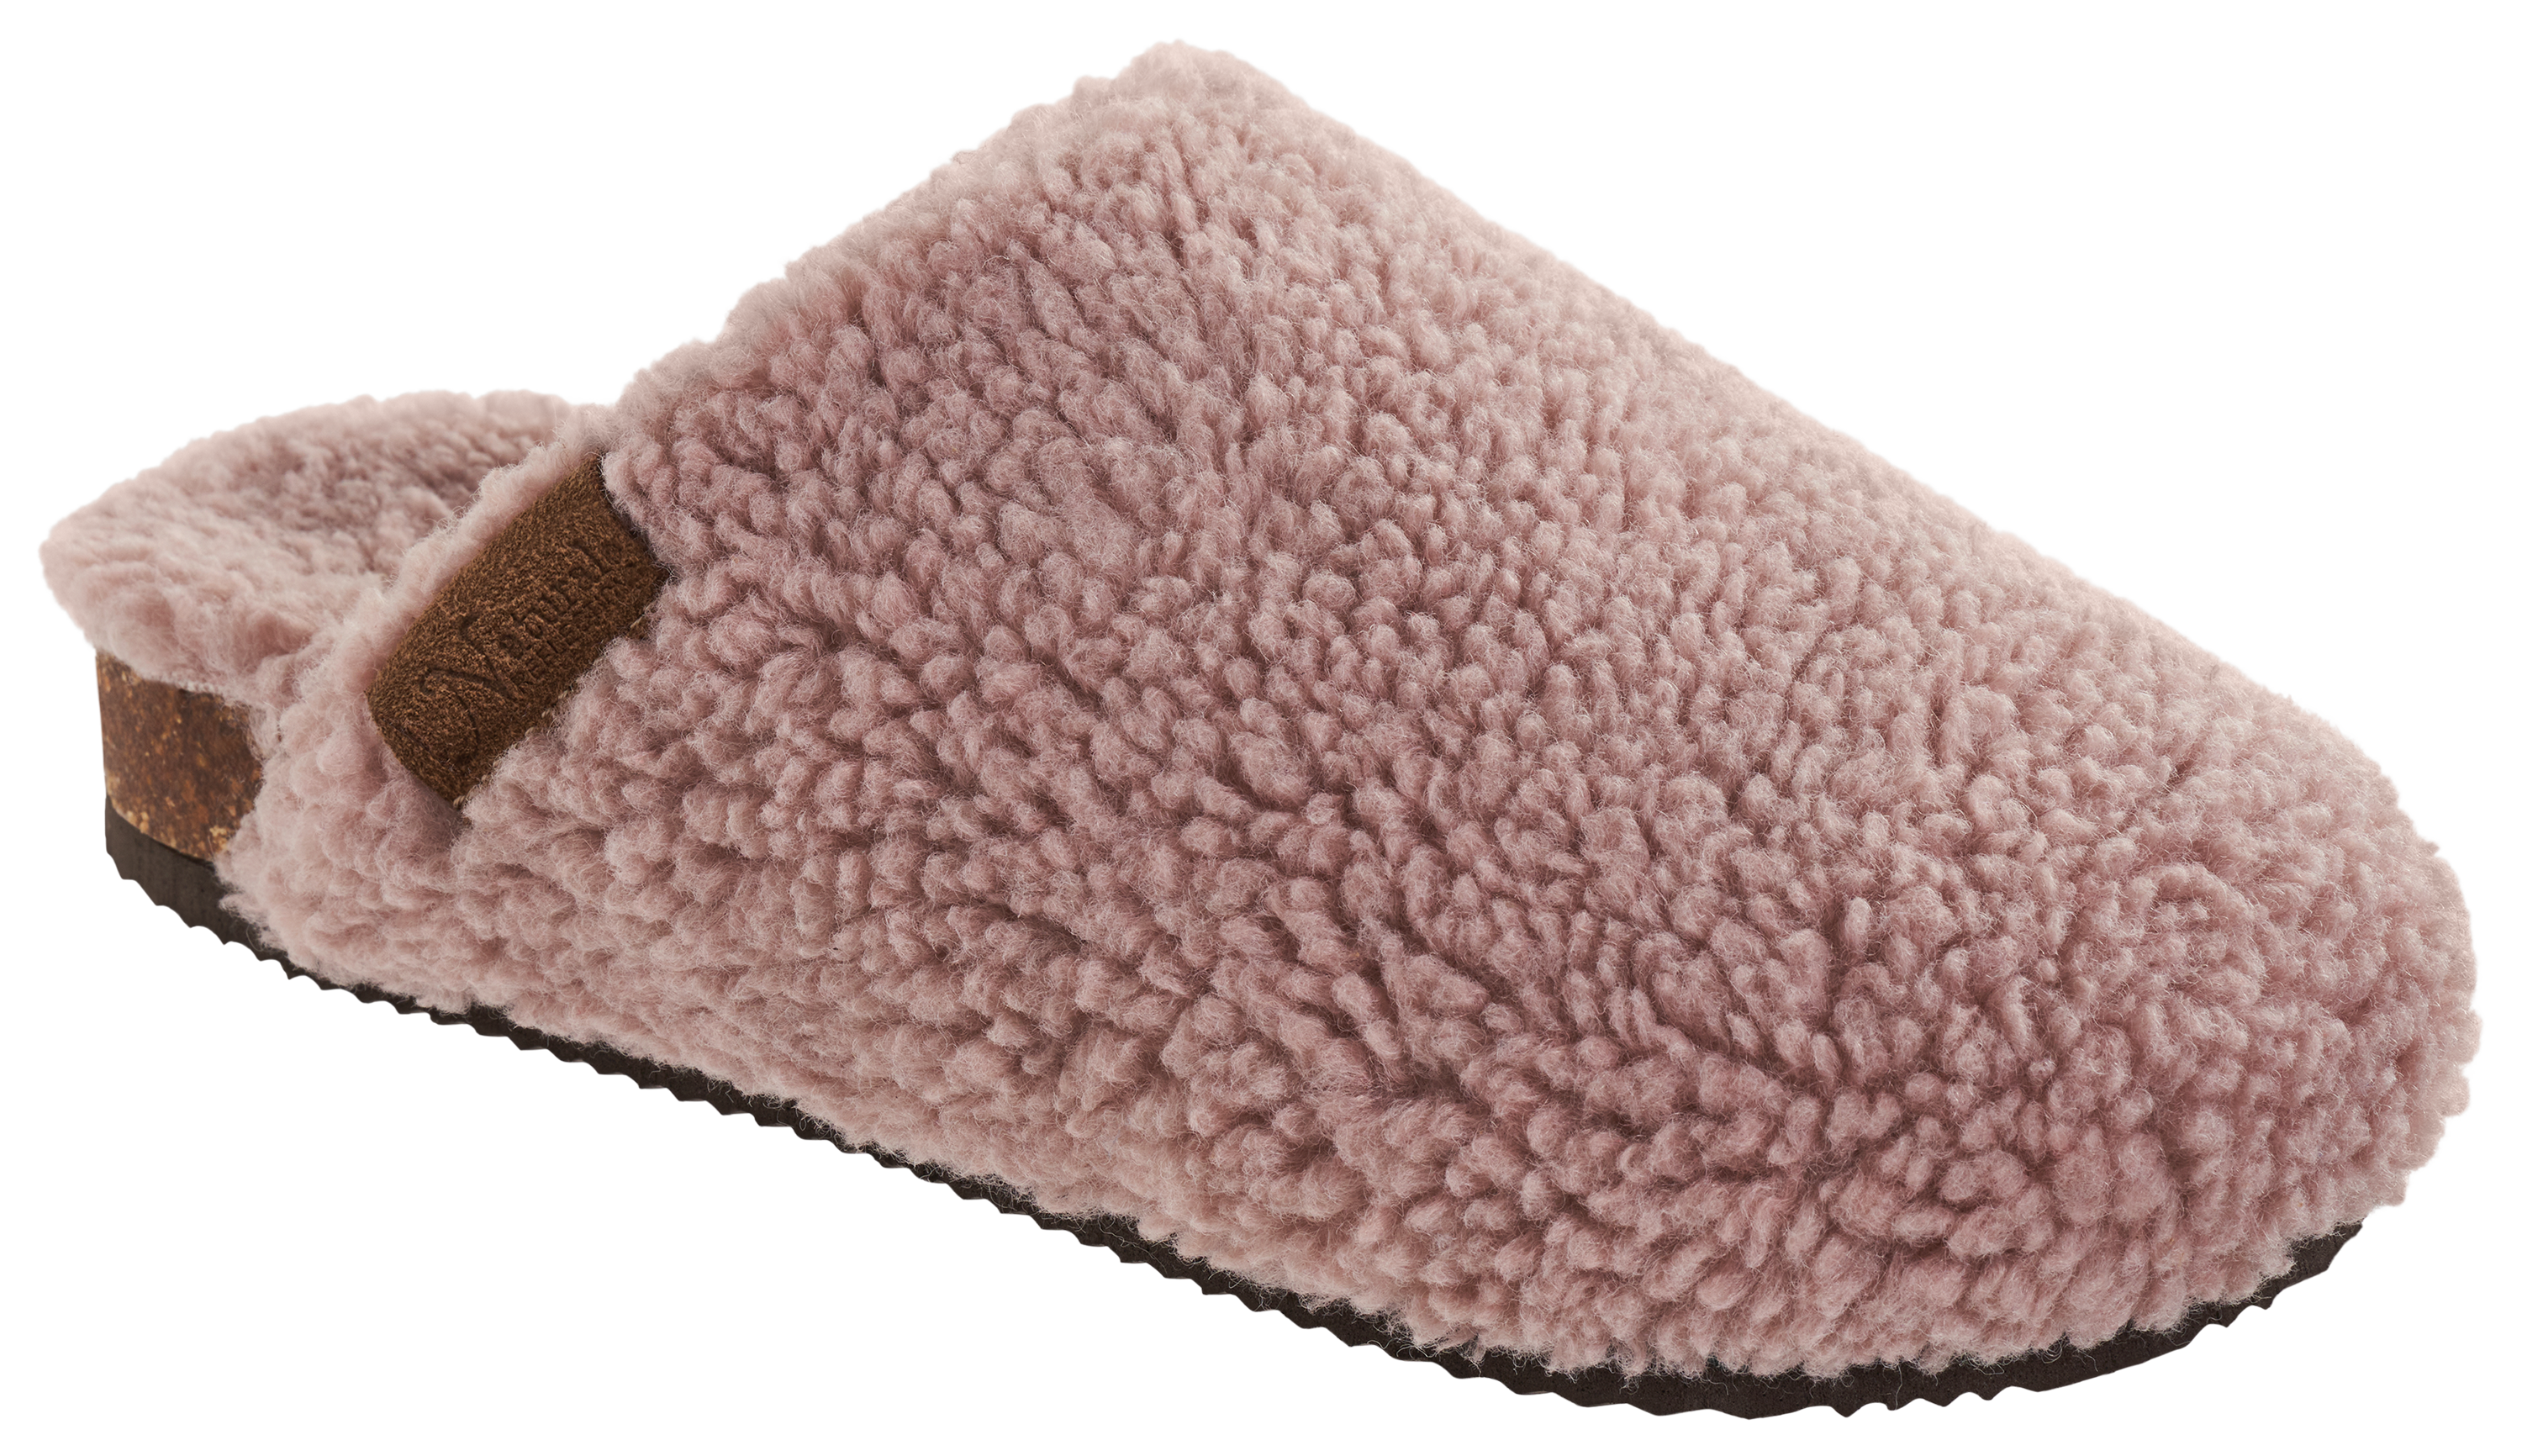 Natural Reflections Lexi Scuff Slippers for Ladies